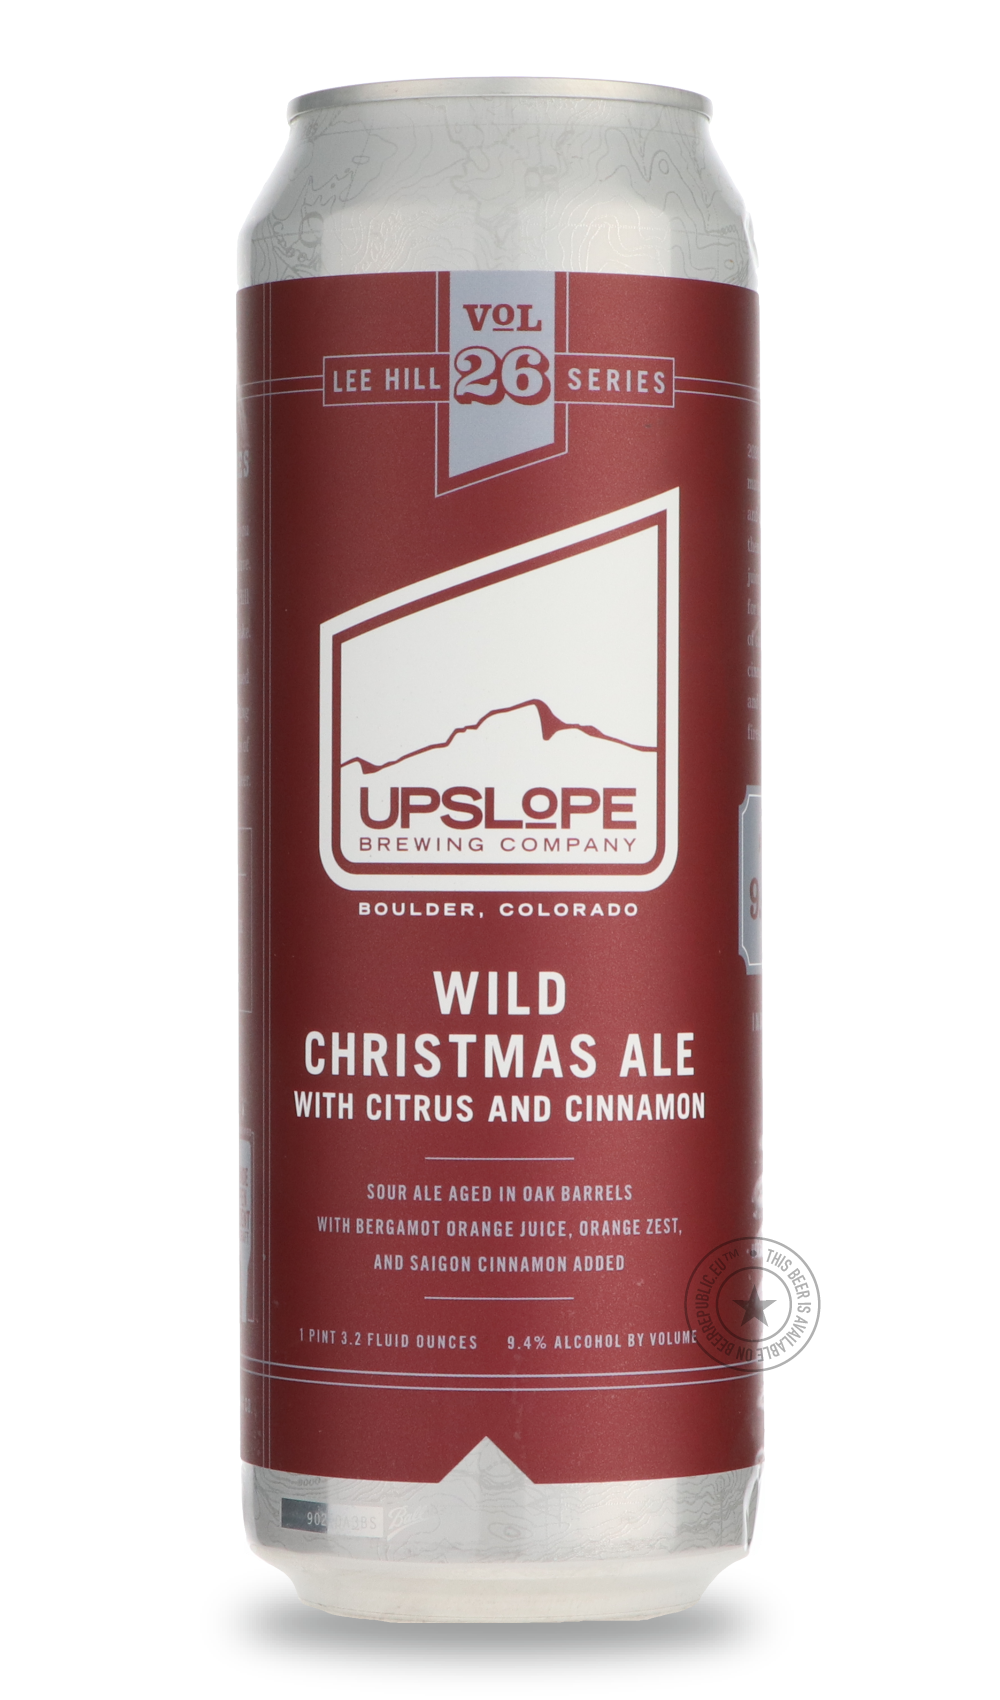 -Upslope- Lee Hill Vol. 26 Wild Christmas Ale With Citrus And Cinnamon-Sour / Wild & Fruity- Only @ Beer Republic - The best online beer store for American & Canadian craft beer - Buy beer online from the USA and Canada - Bier online kopen - Amerikaans bier kopen - Craft beer store - Craft beer kopen - Amerikanisch bier kaufen - Bier online kaufen - Acheter biere online - IPA - Stout - Porter - New England IPA - Hazy IPA - Imperial Stout - Barrel Aged - Barrel Aged Imperial Stout - Brown - Dark beer - Blond